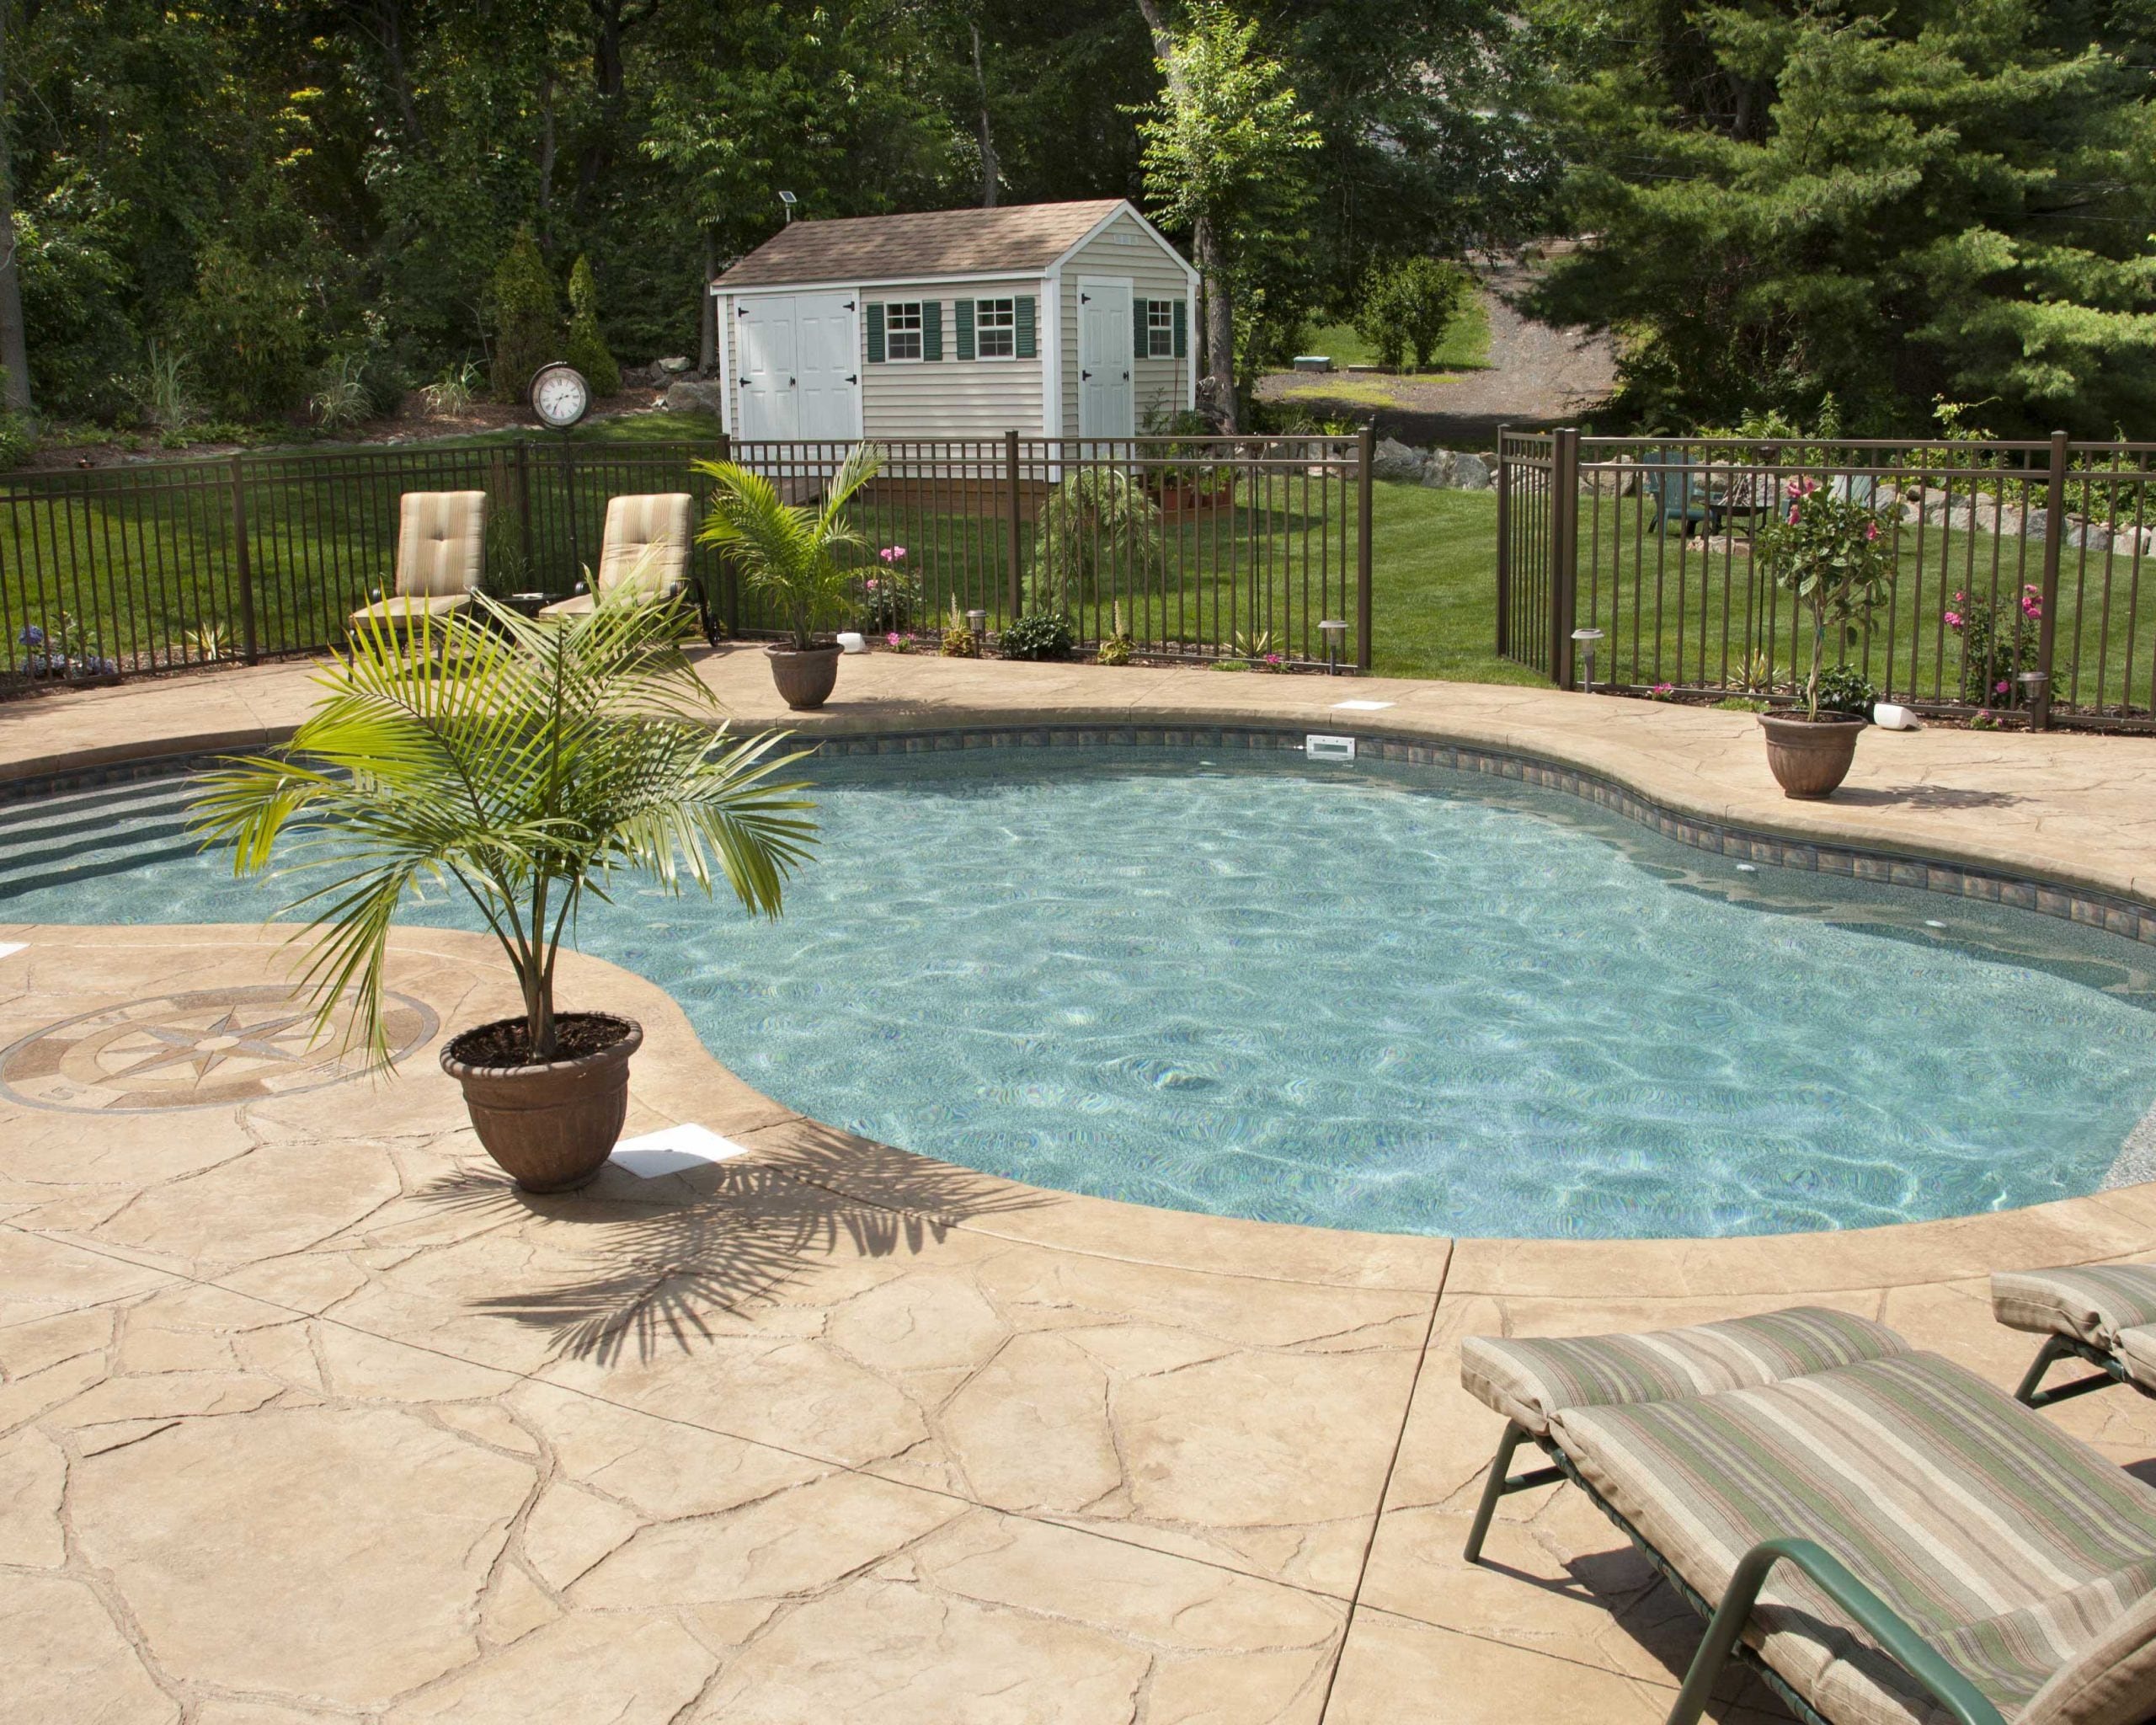 A decorative concrete pool deck designed and constructed by professional concrete contractors.